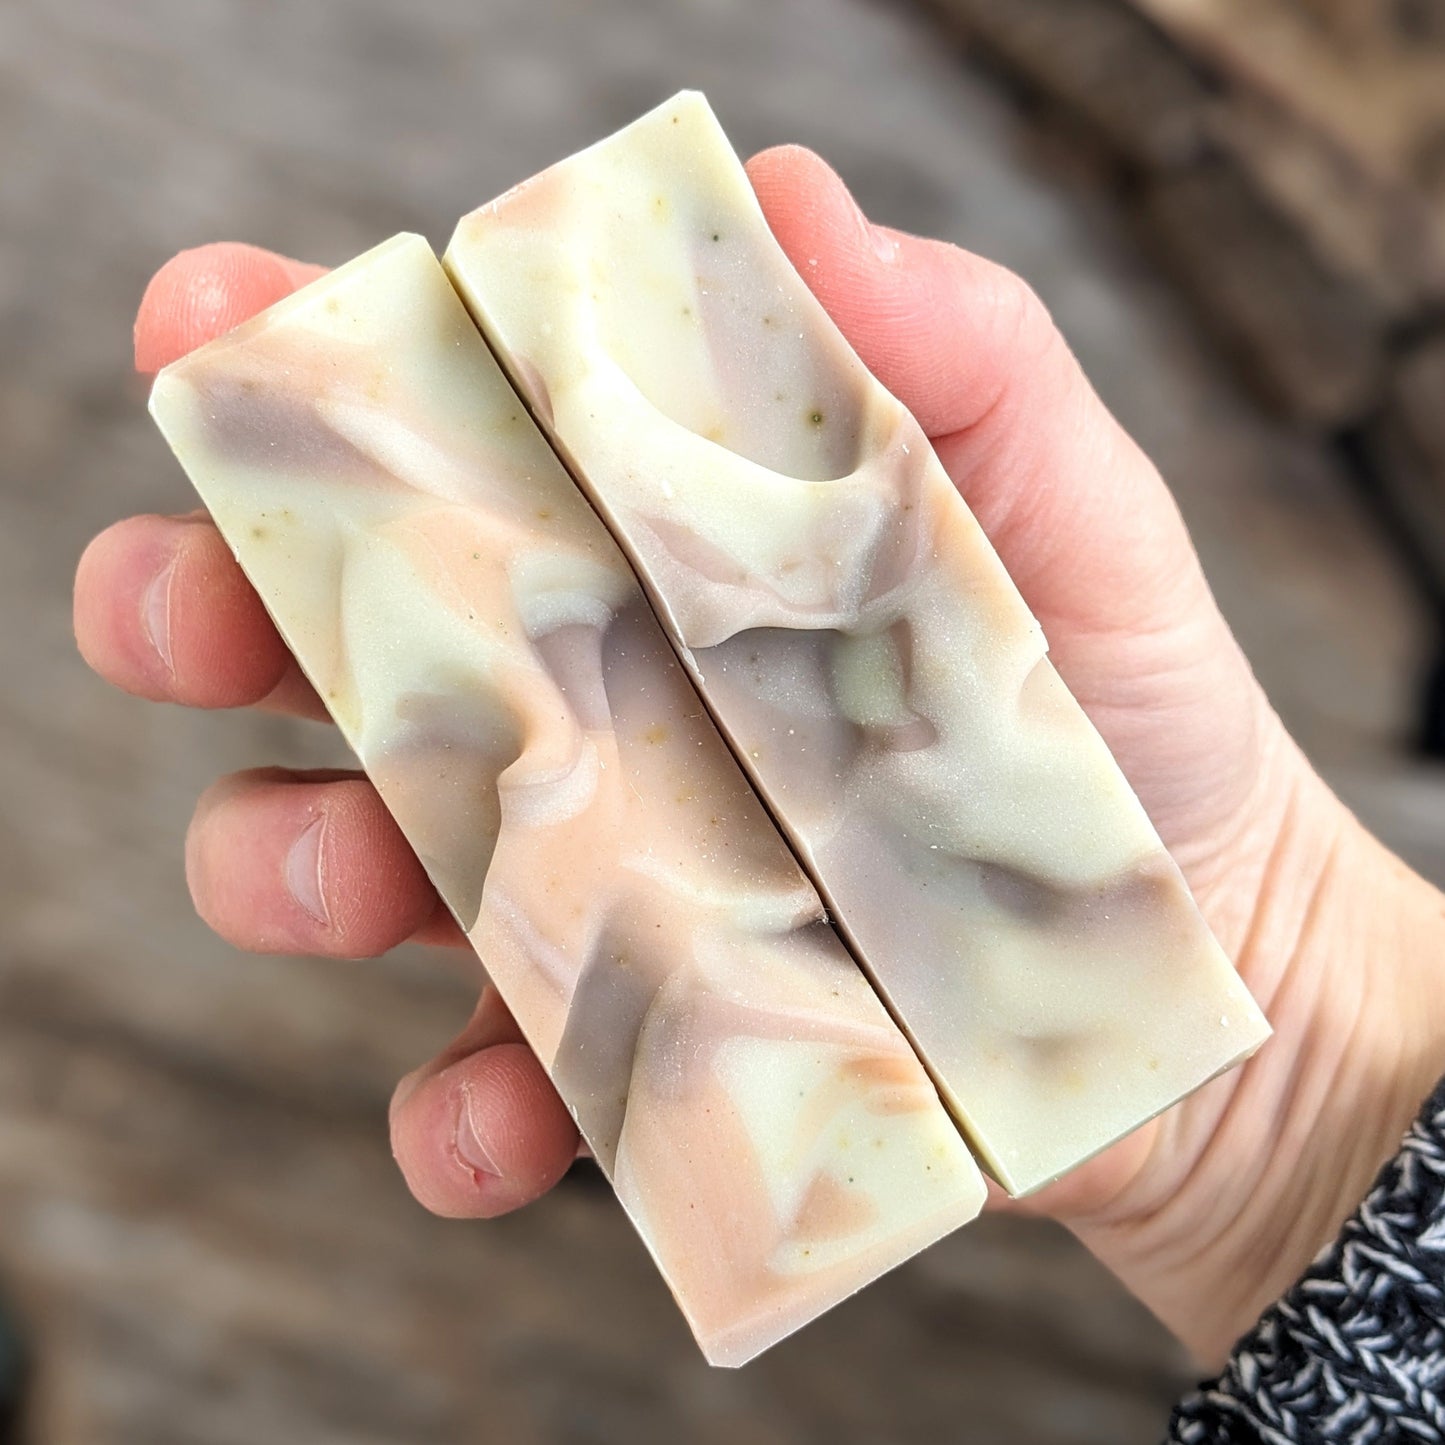 Natural Soap | ROSEMARY LAVENDER - Herbal Soap with Clay & Rosemary Powder